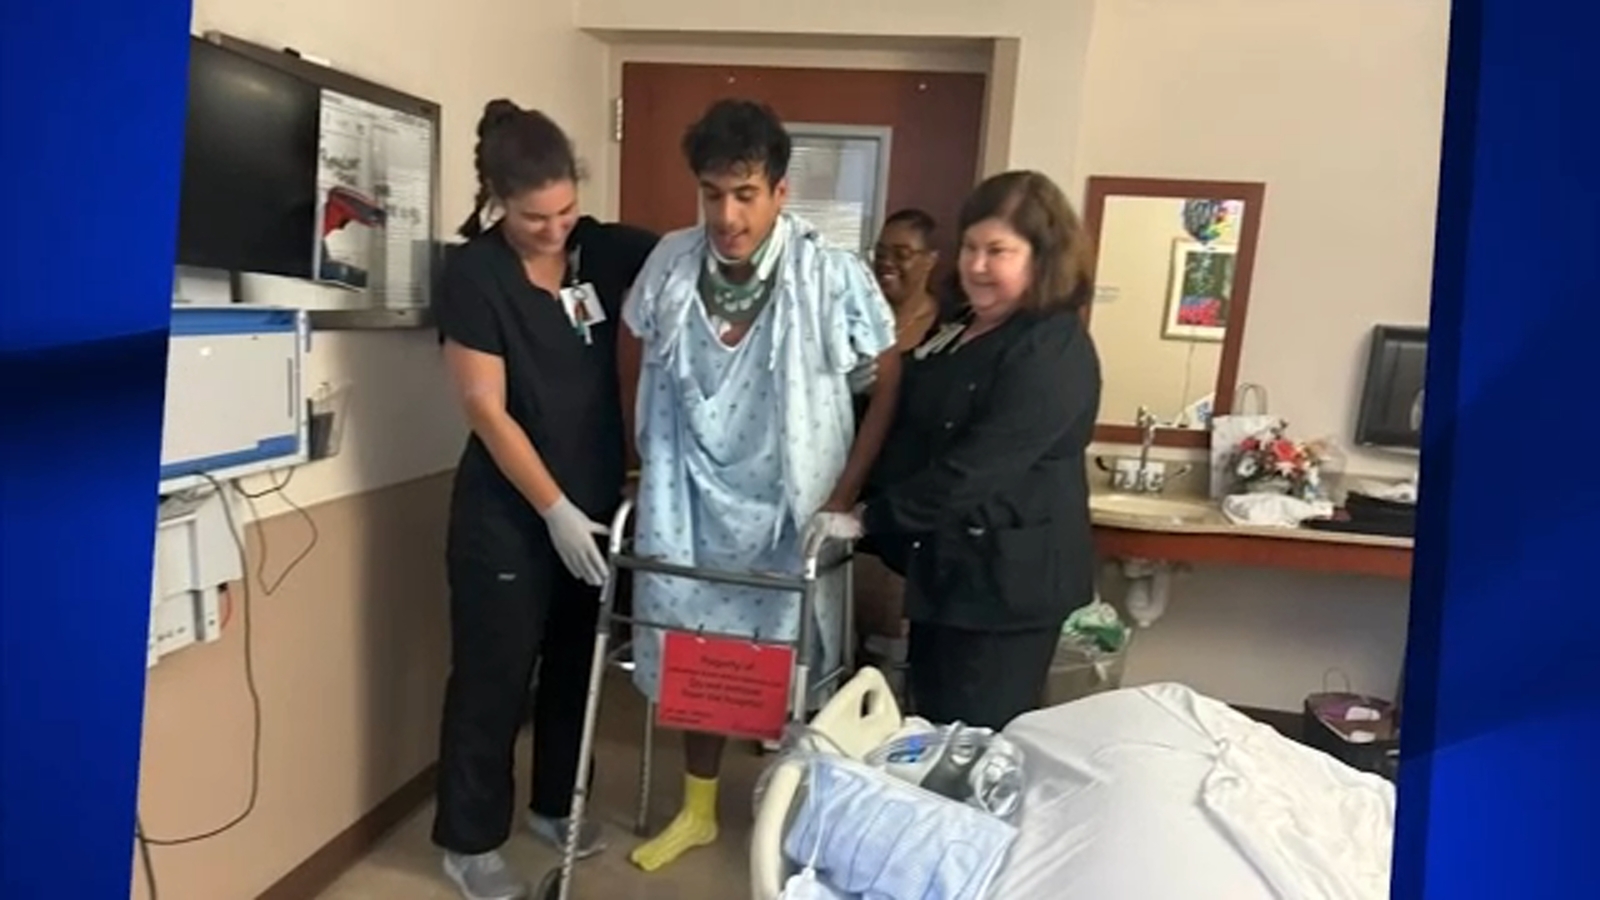 Youssef Bounagui | Hero lifeguard recovering from spinal injuries after rescuing boy from drowning at Holly Springs country club [Video]